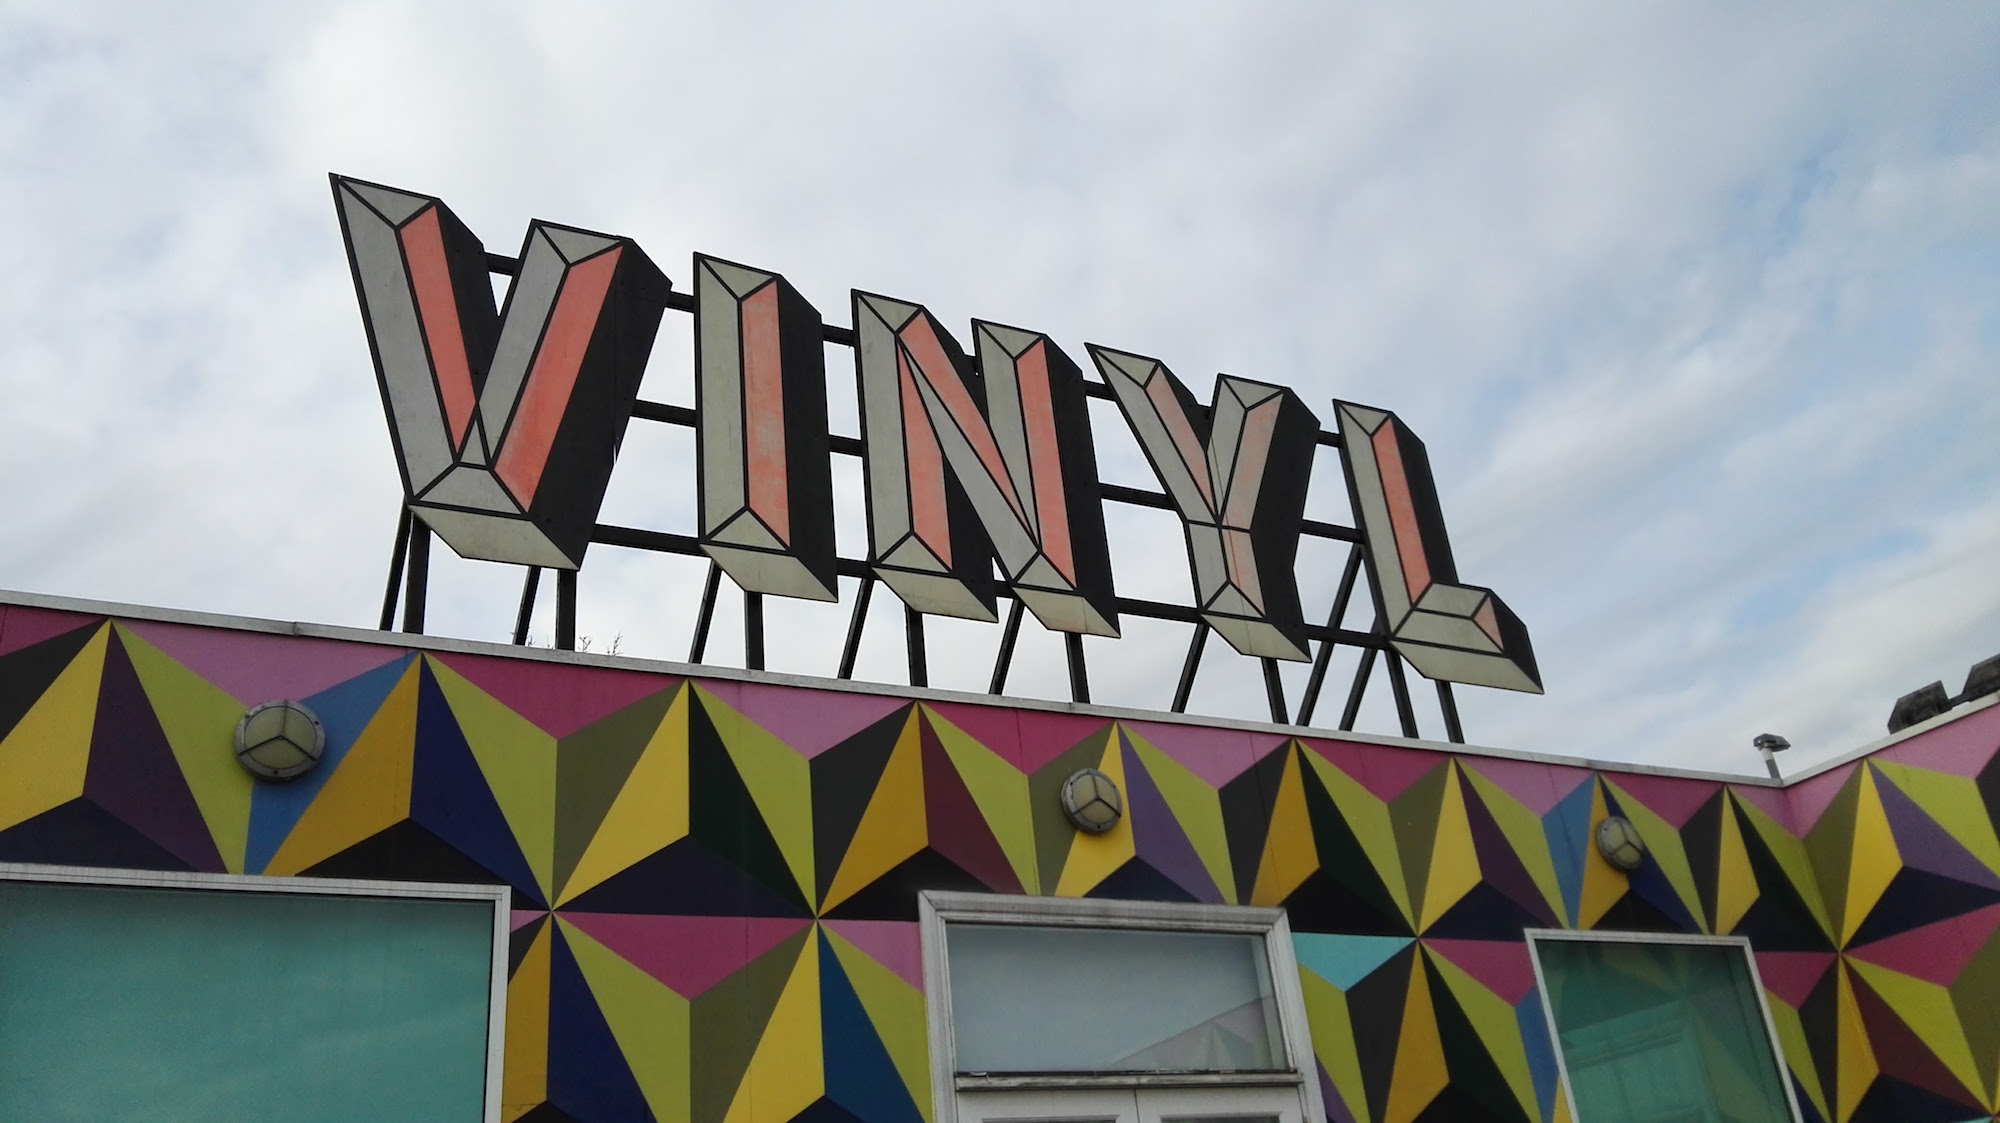 Vinyl signage on one of the buildings at the Old Vinyl Factory